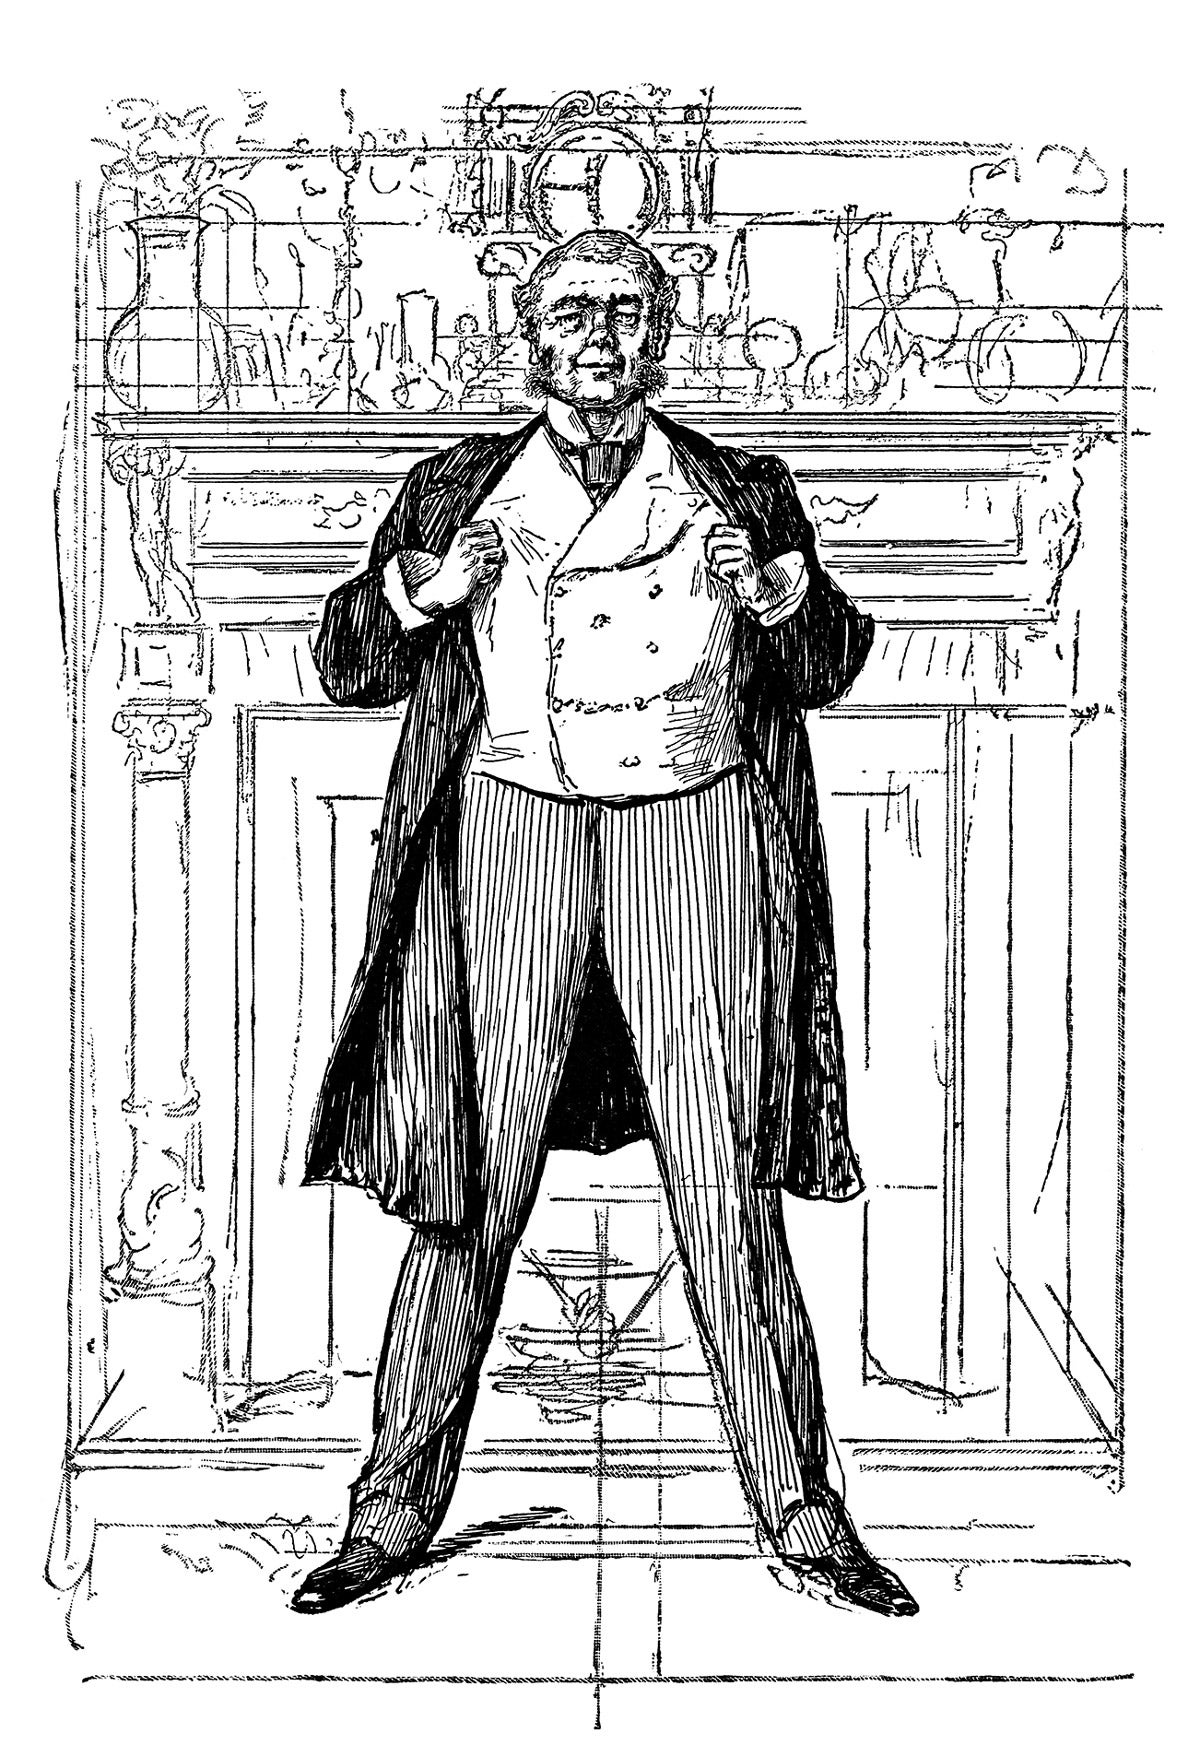 Historical-style illustration: åçA man in formal wear — vest, suit coat, ascot, high collars — stands in front of an ornate fireplace with his hands tucked under his arms, pushing out his chest in a proud expression.